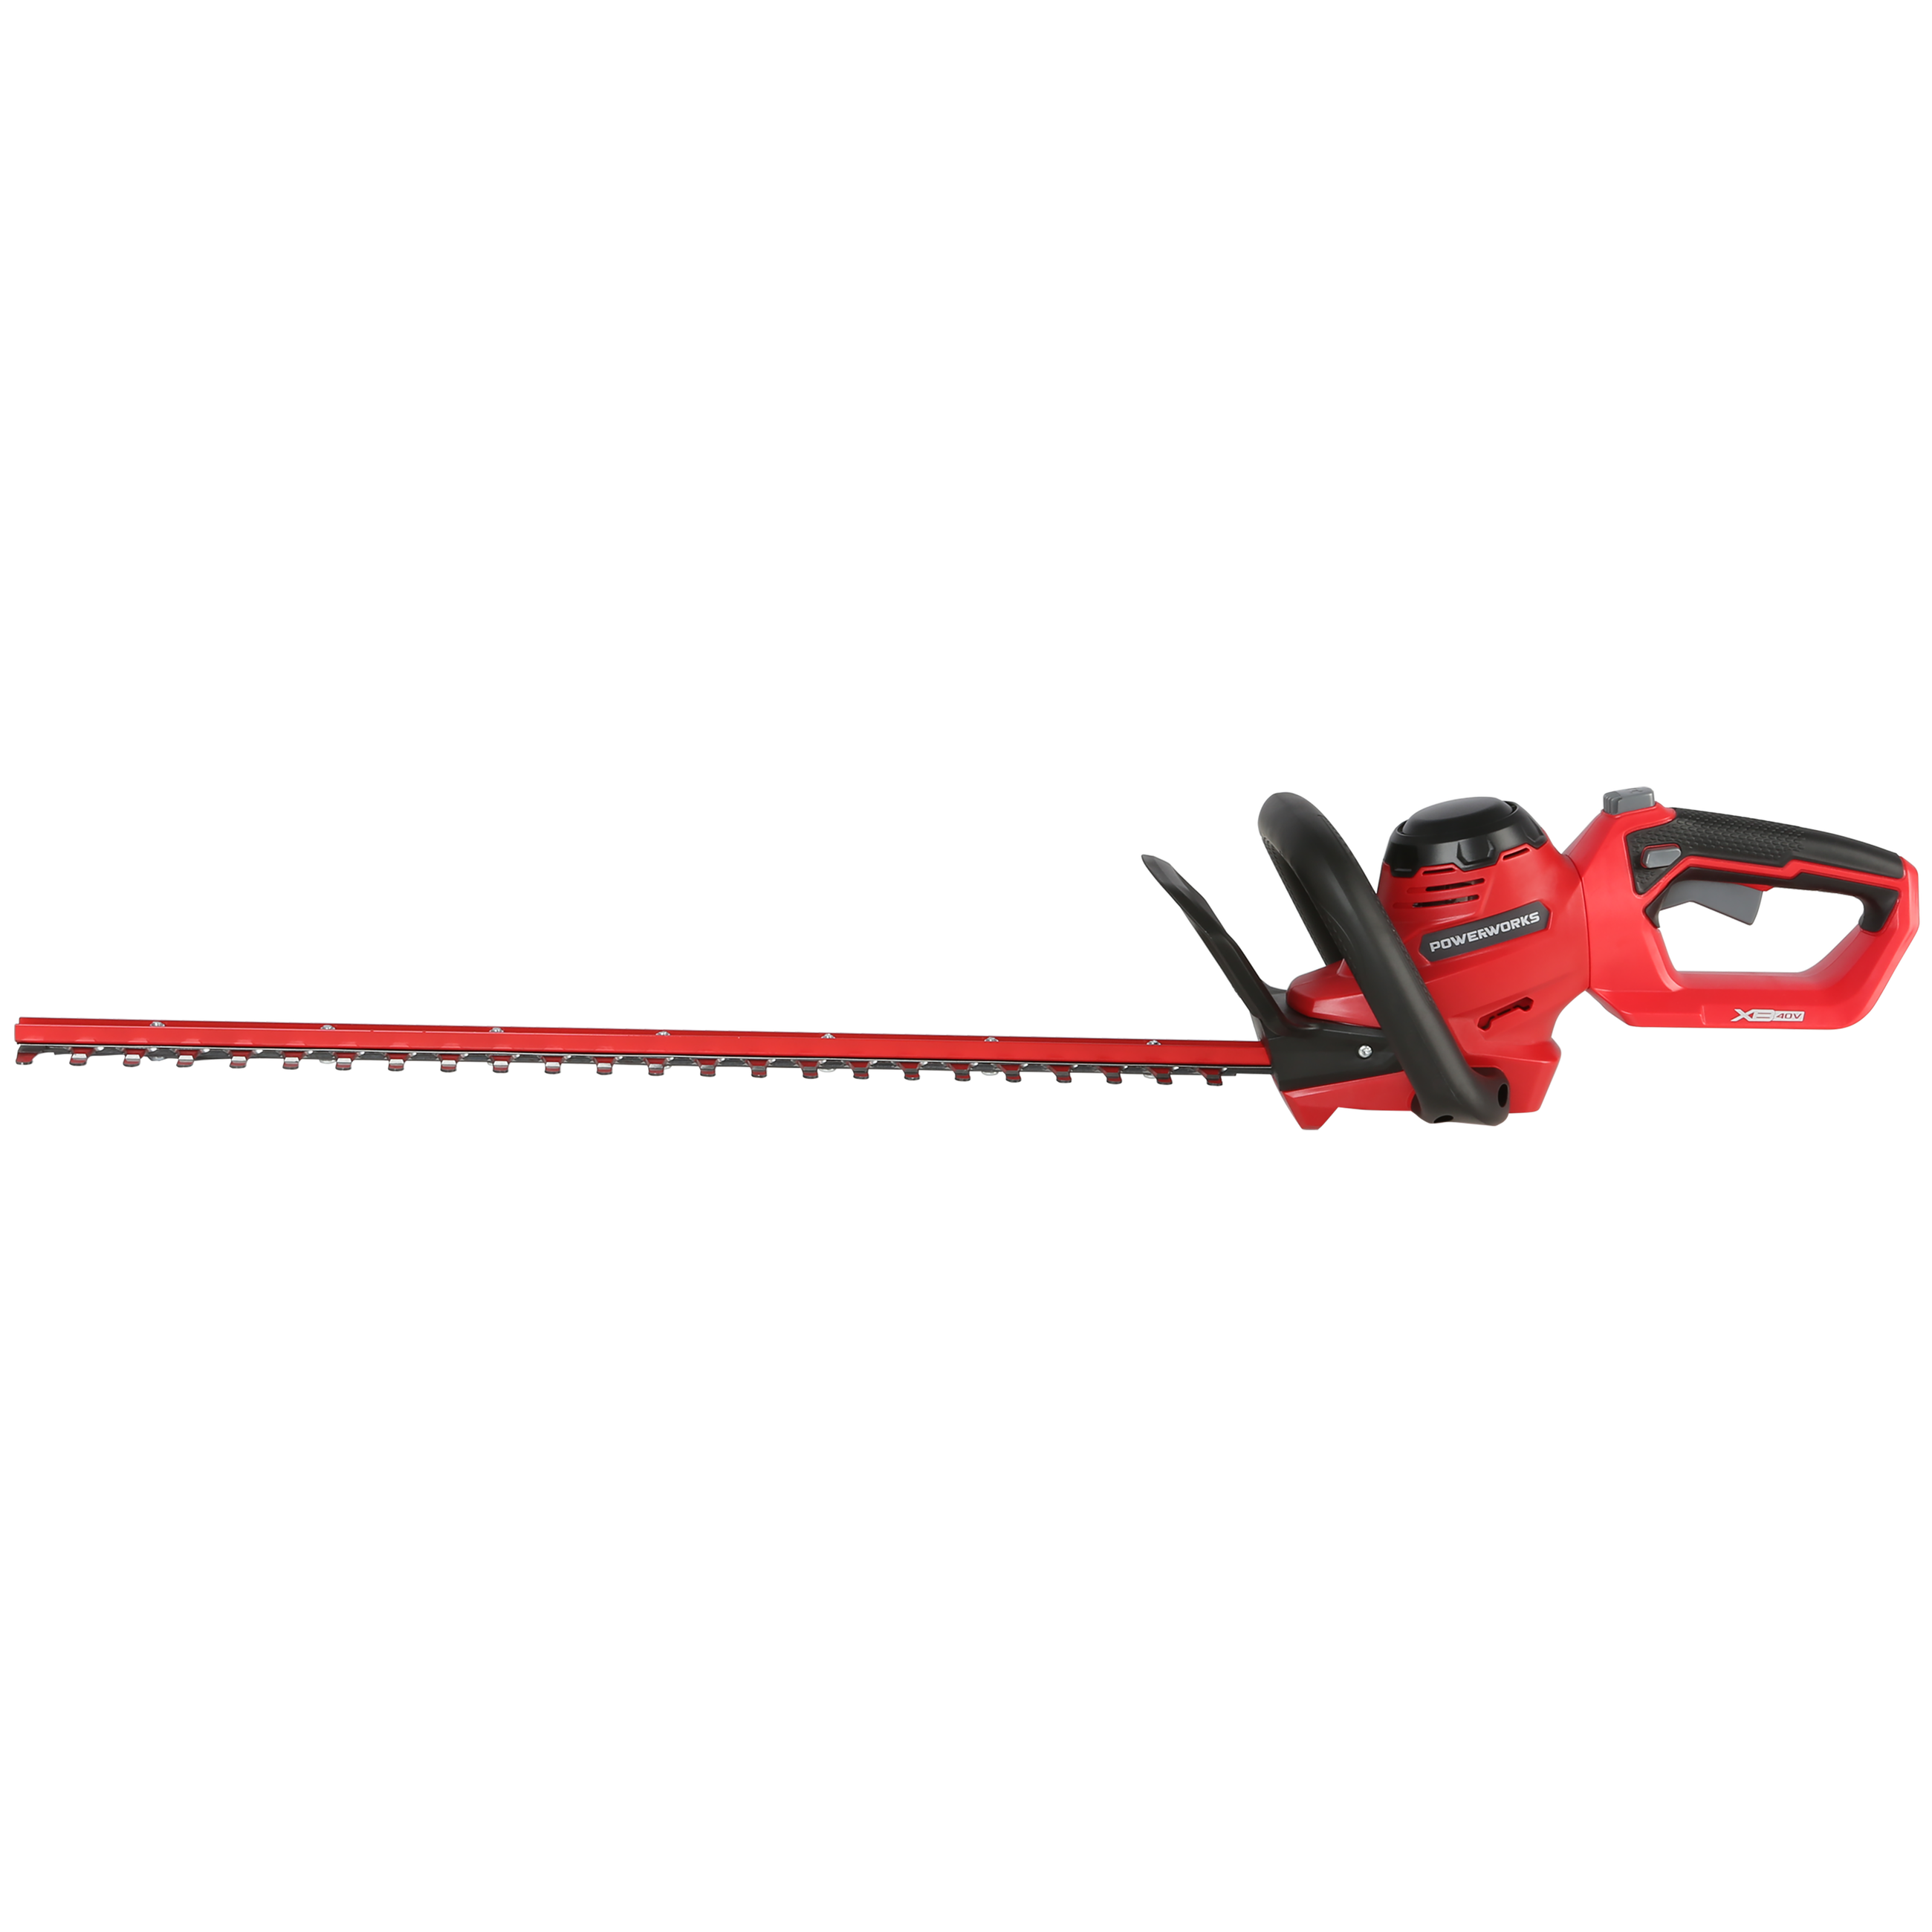 POWERWORKS XB 40V 24-Inch Cordless Hedge Trimmer 2Ah Battery and Charger Included HTP302 